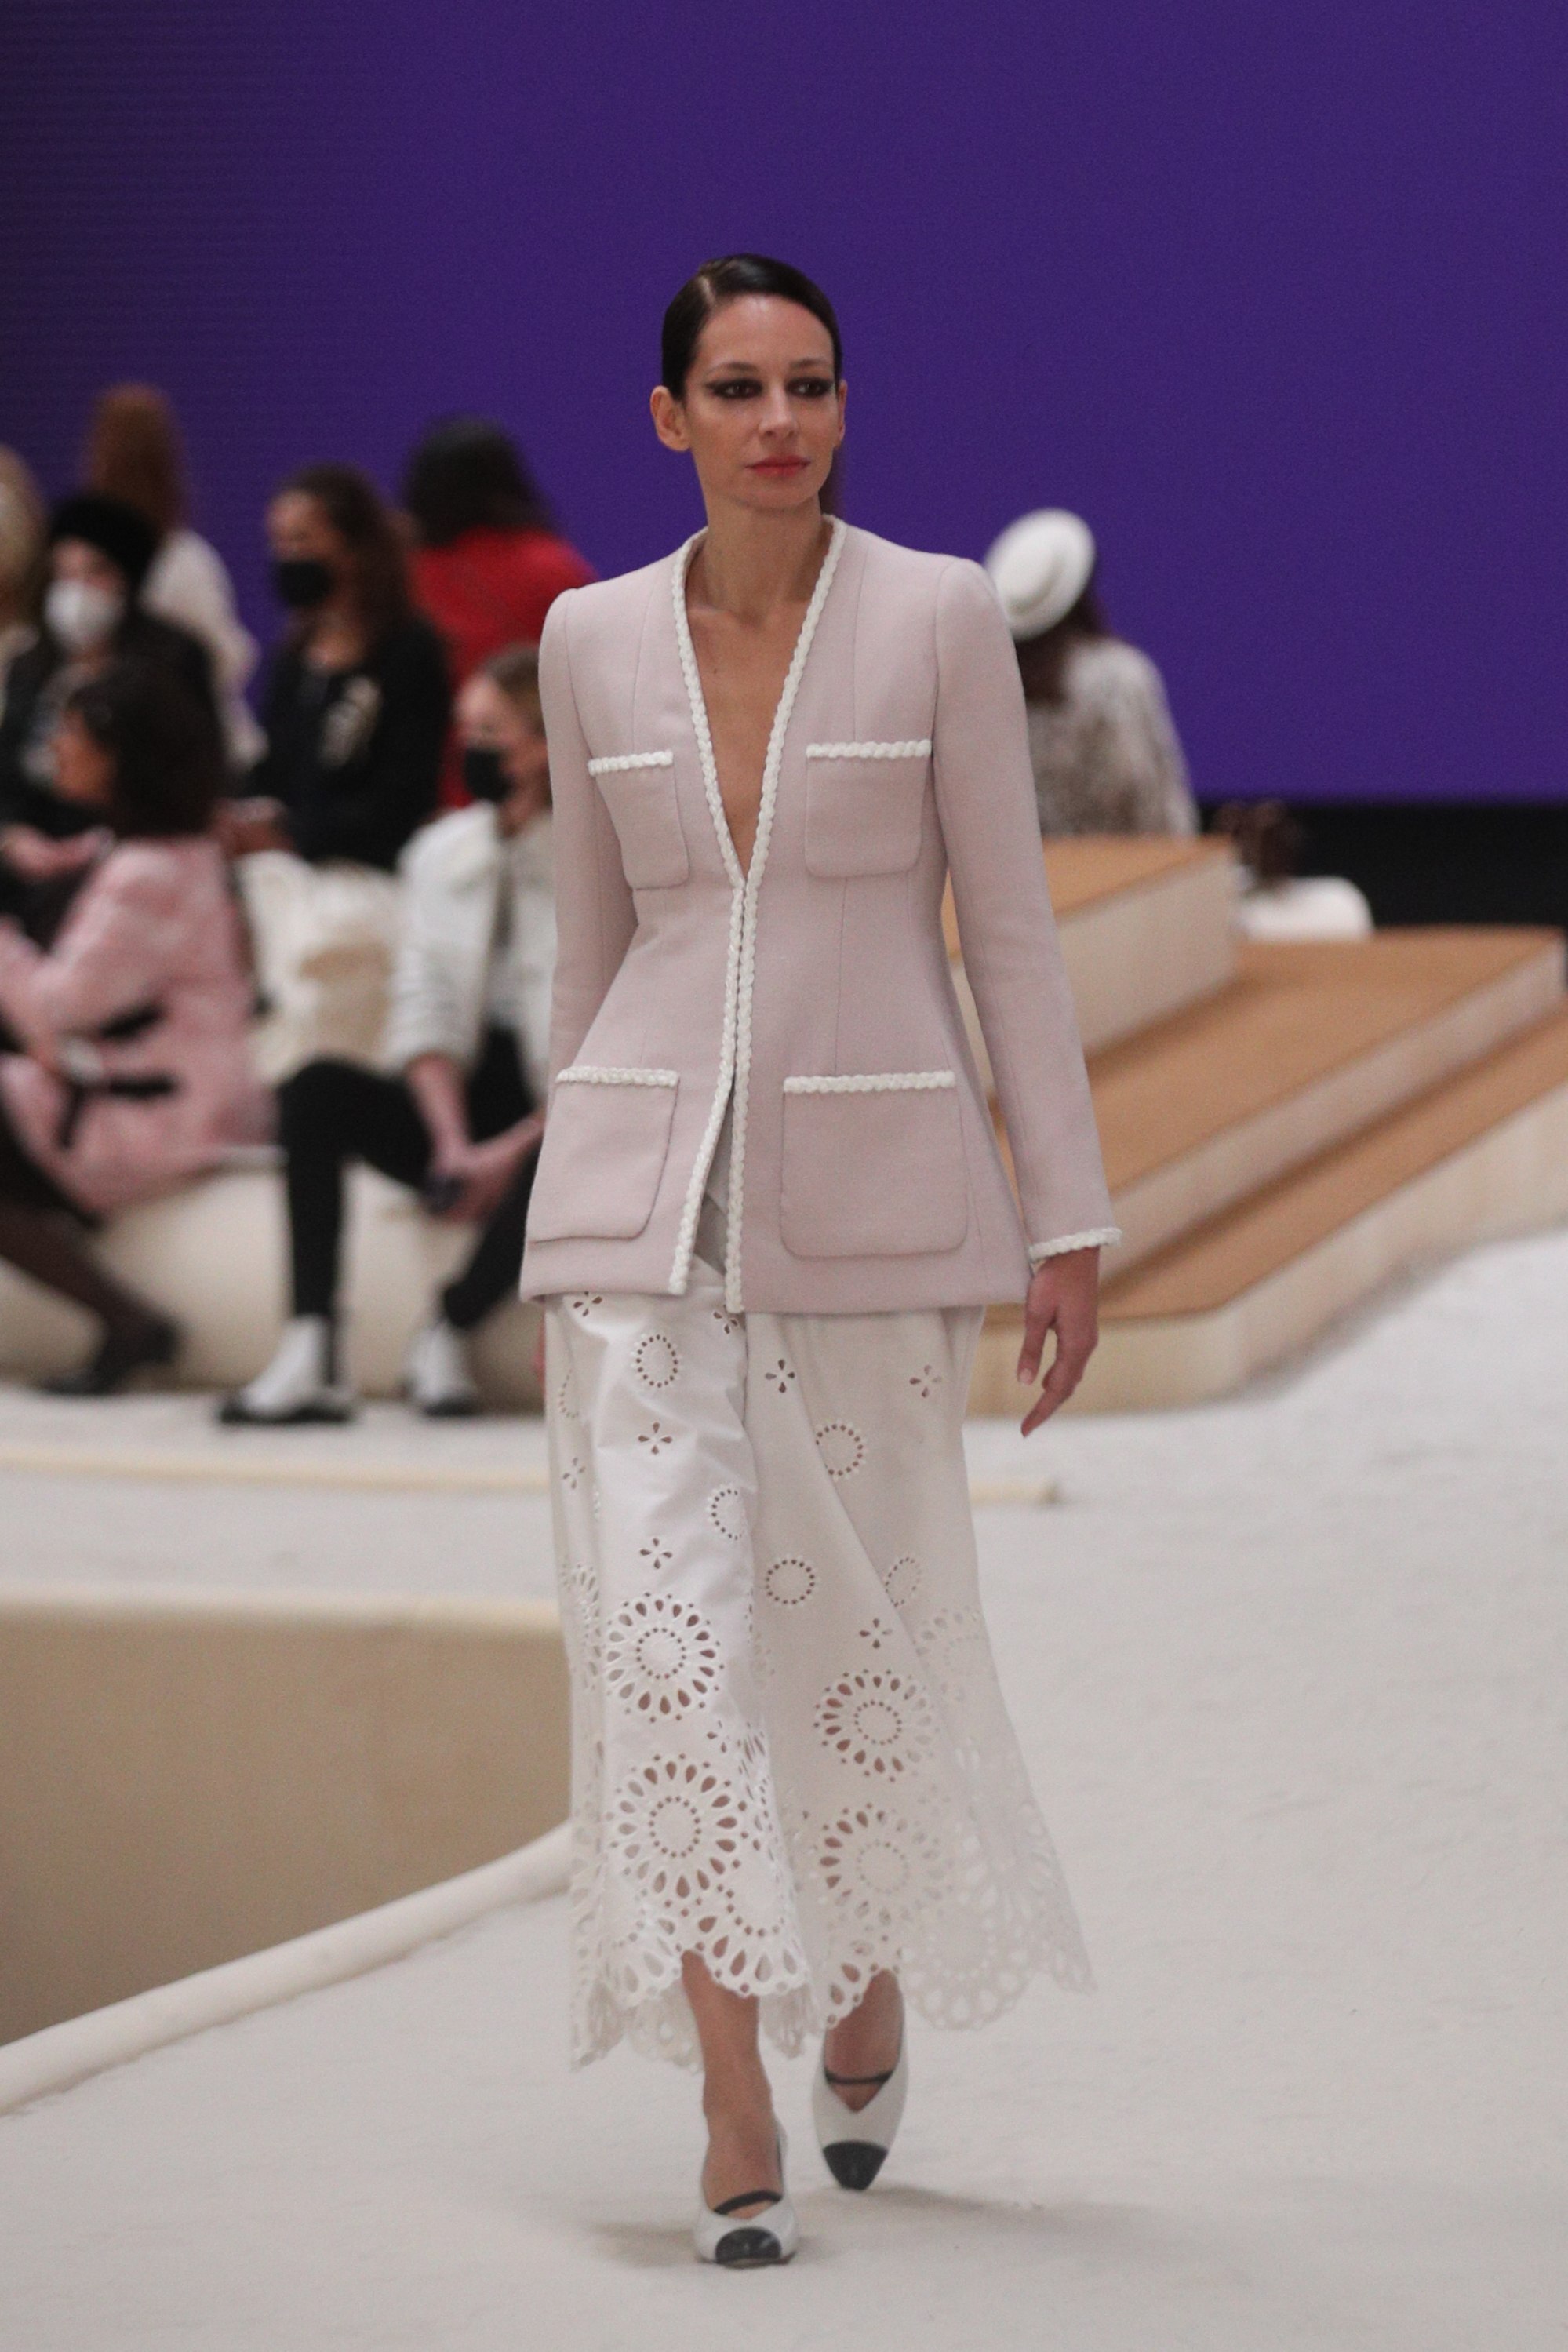 Chanel unveils the spring/summer 2022 couture show by Virginie Viard, as  Princess Grace Kelly's granddaughter Charlotte Casiraghi made a surprise  horseback entrance